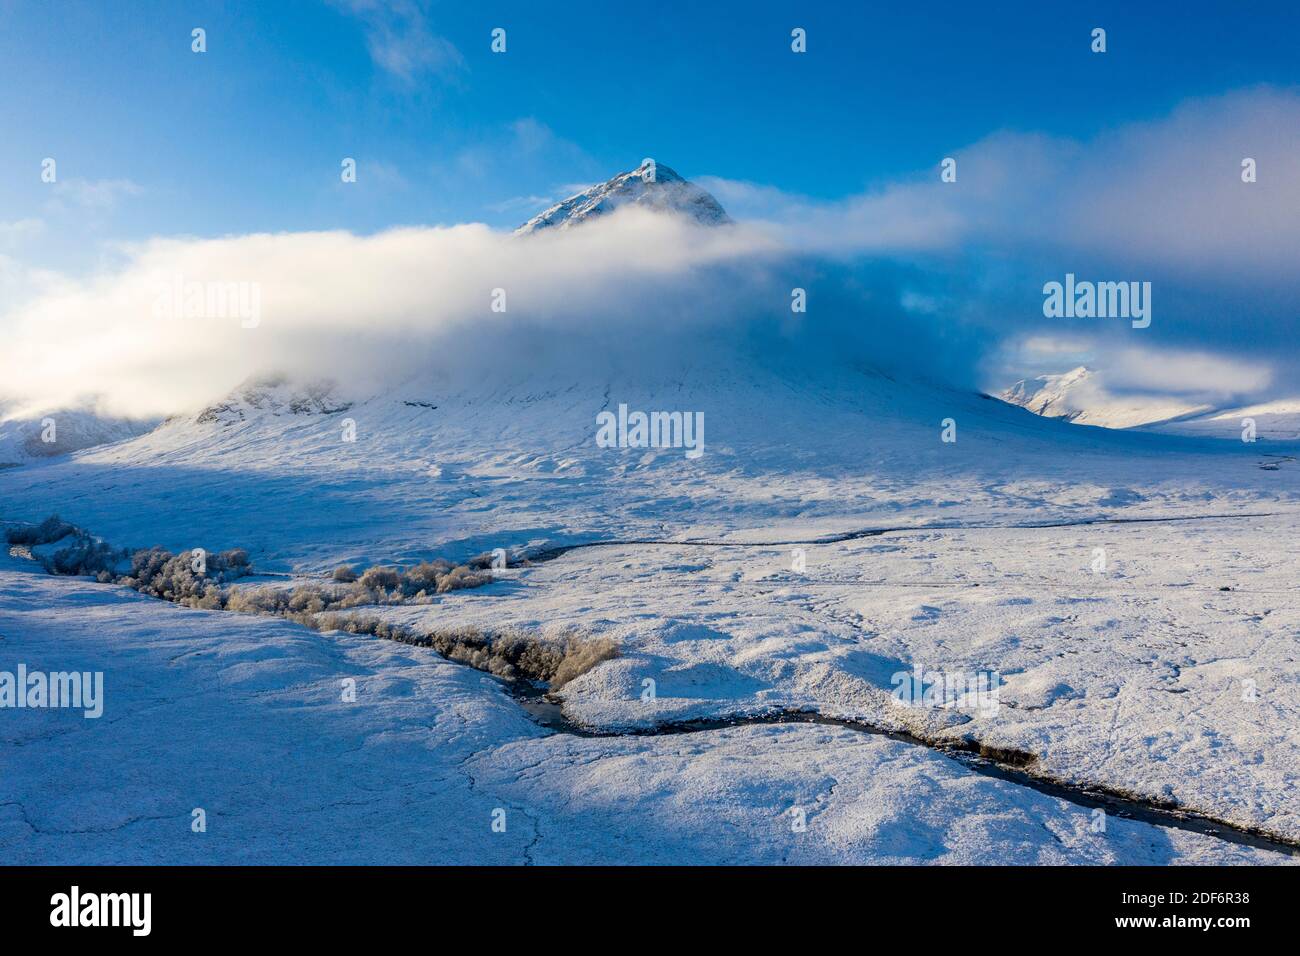 Glen Coe, Scotland, UK. 3 December 2020. A cold front has brought the first snowfall to the Scottish Highlands. Rannoch Moor and Glen Coe are covered in several inches of snow. Bright sunshine throughout the day created beautiful winter landscapes.  Pictured; Buachaille Etive Mor  shrouded in mist.  Iain Masterton/Alamy Live News Stock Photo